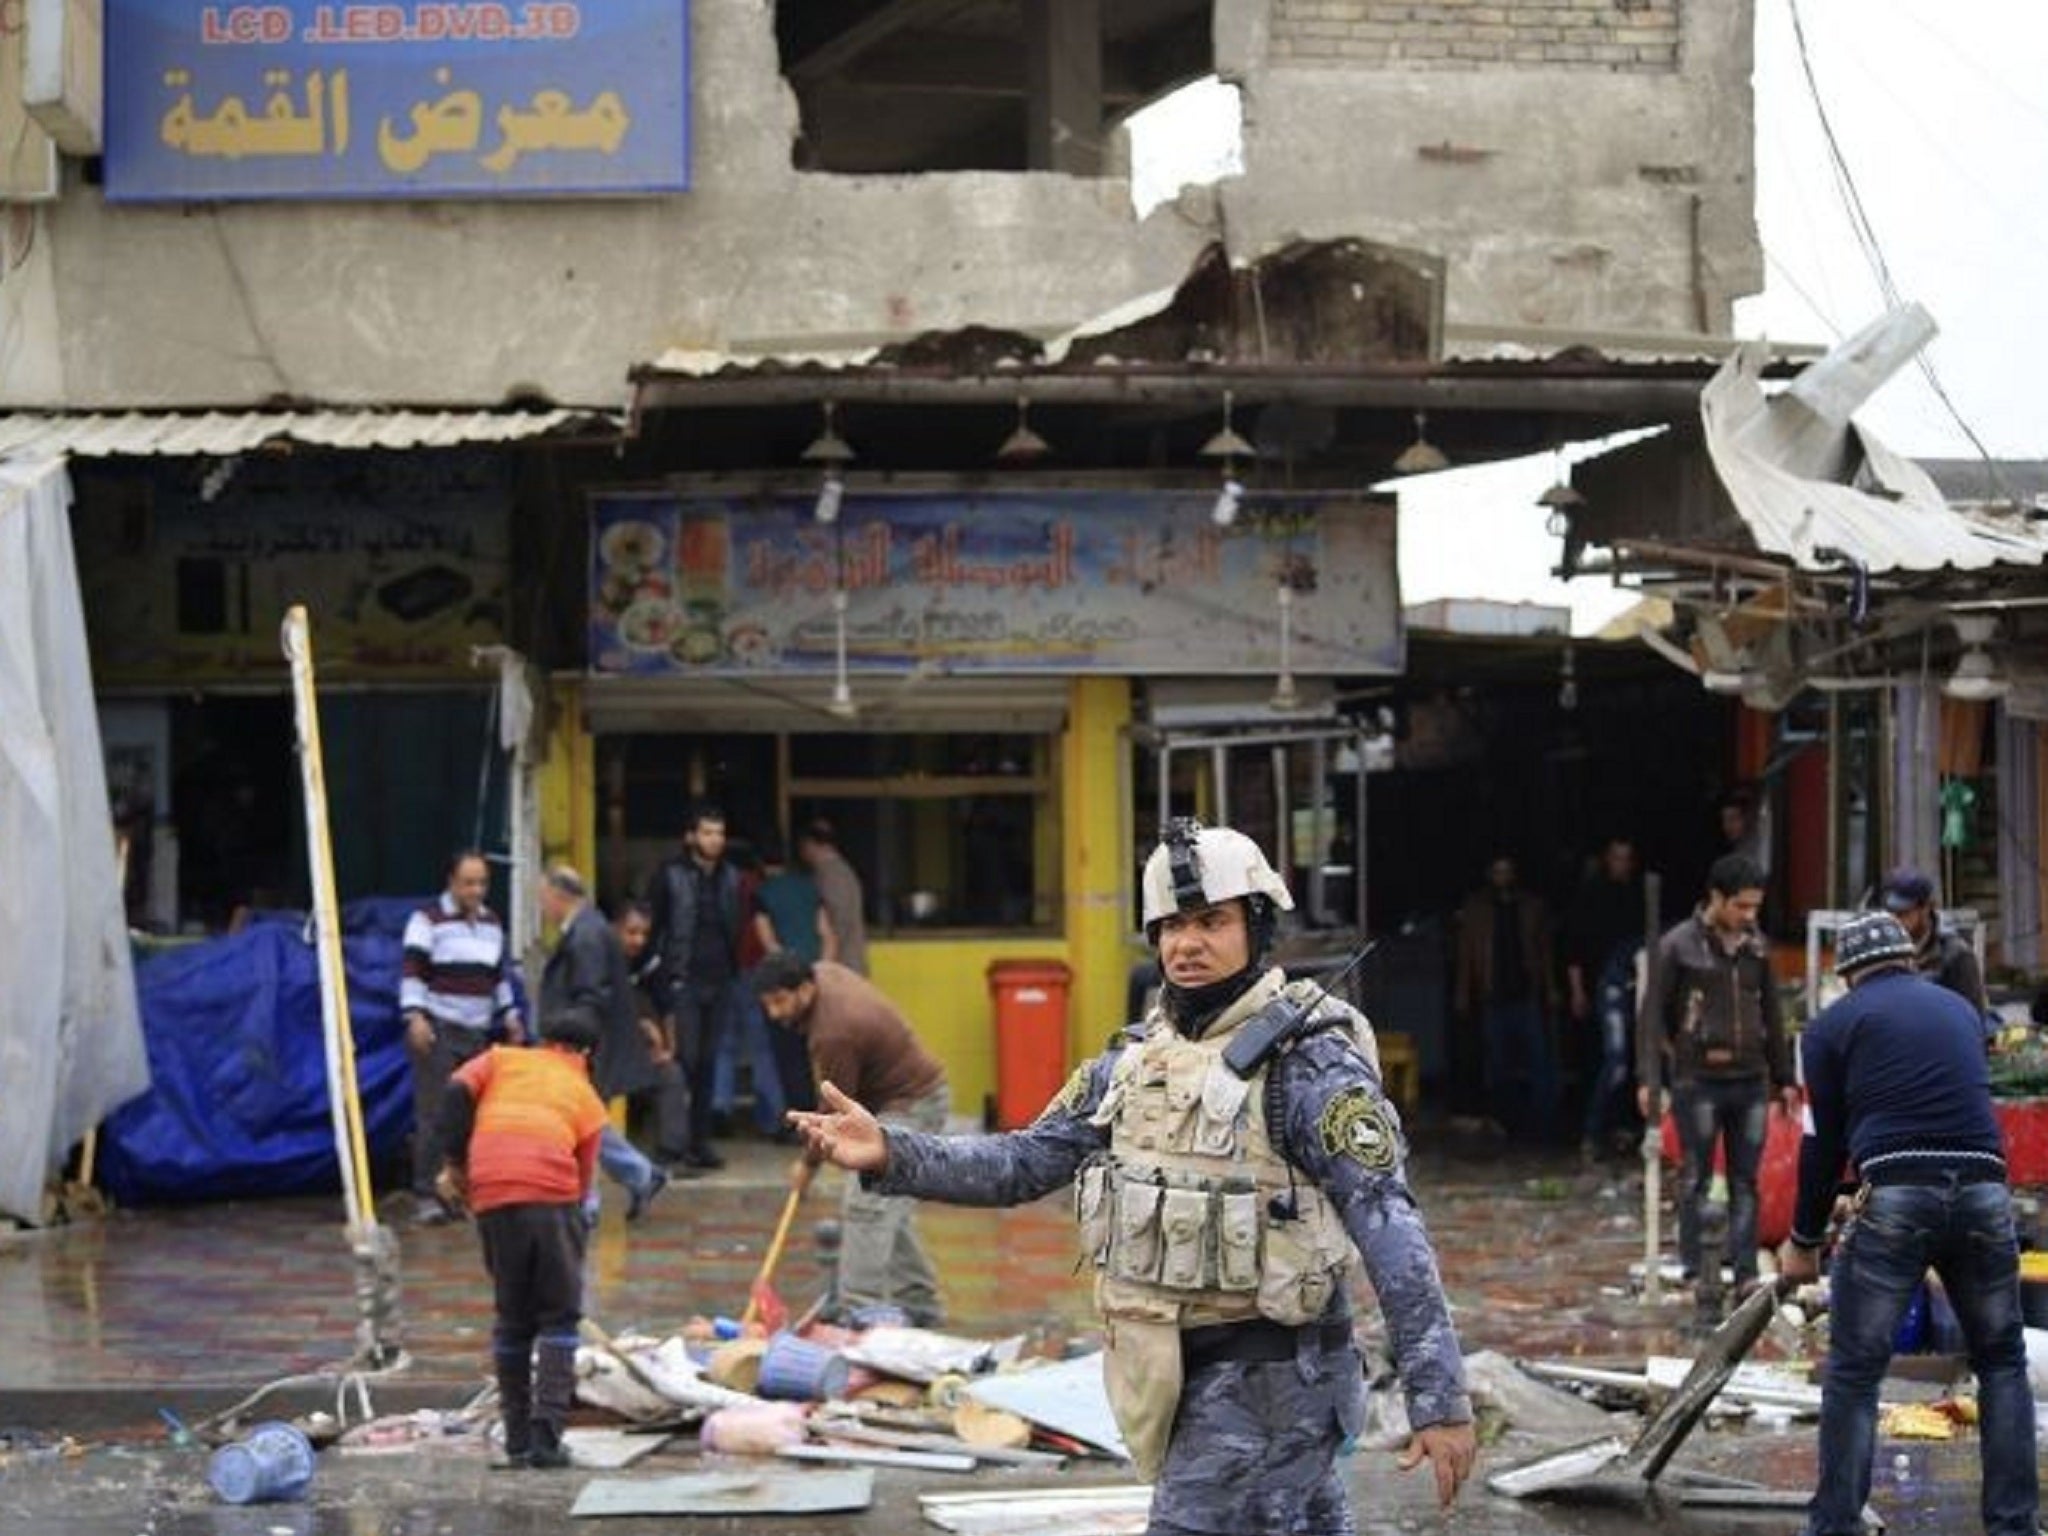 Iraqi policeman helps usher pedestrians away from the bombing scene in New Baghdad